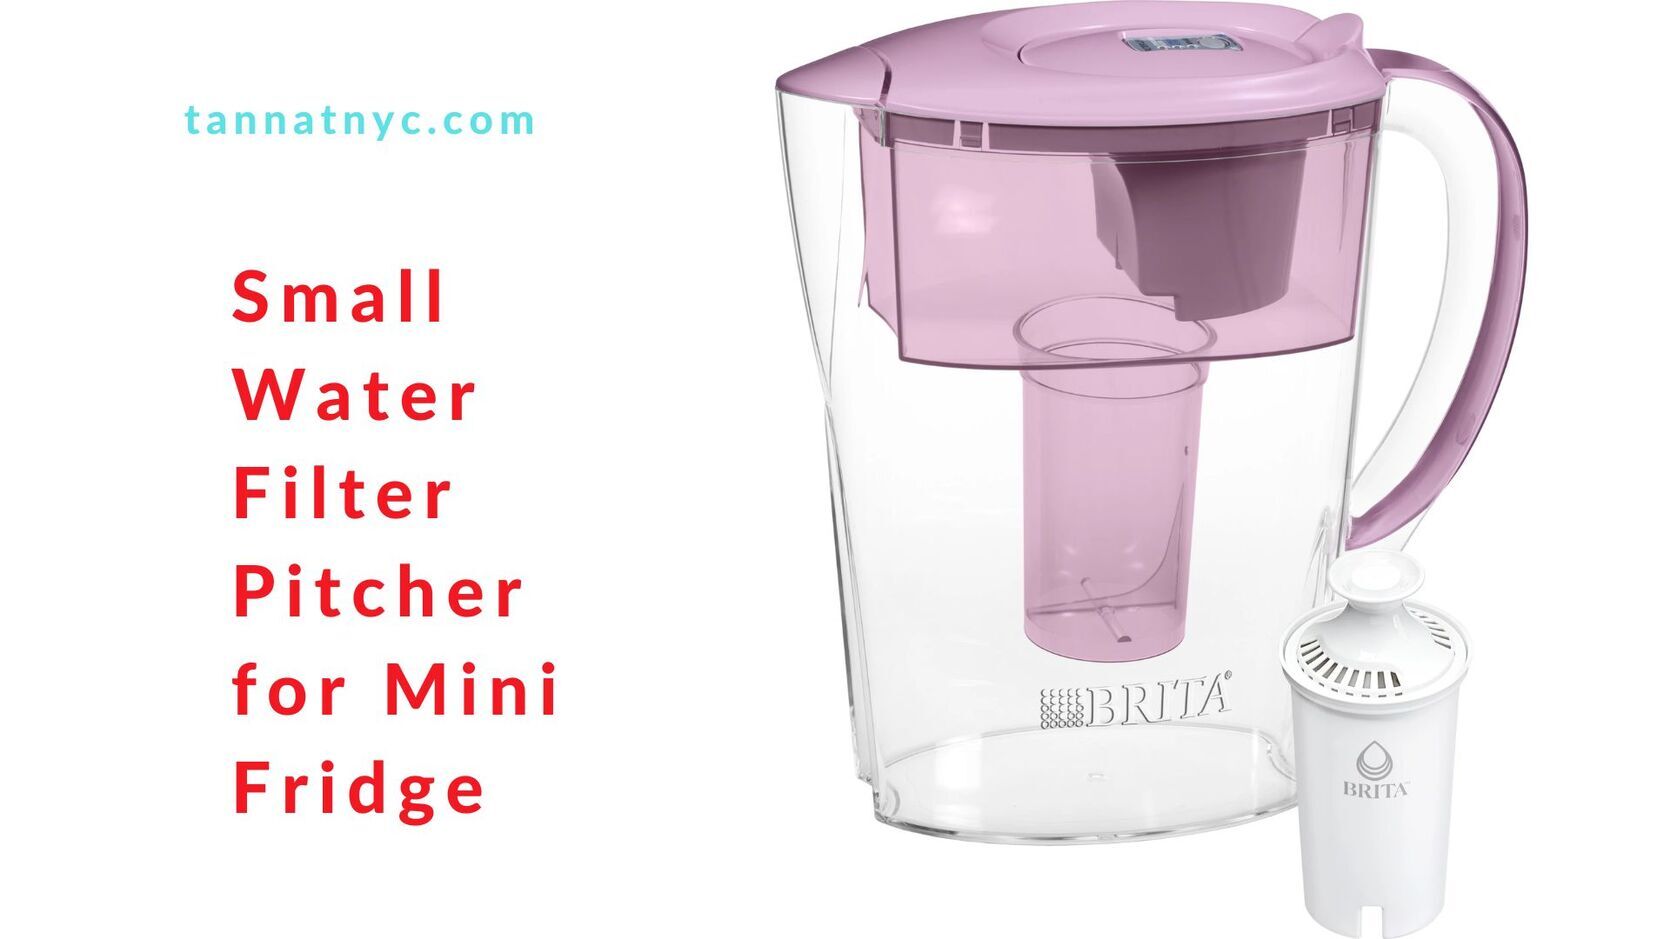 Small-Water-Filter-Pitcher-for-Mini-Fridge